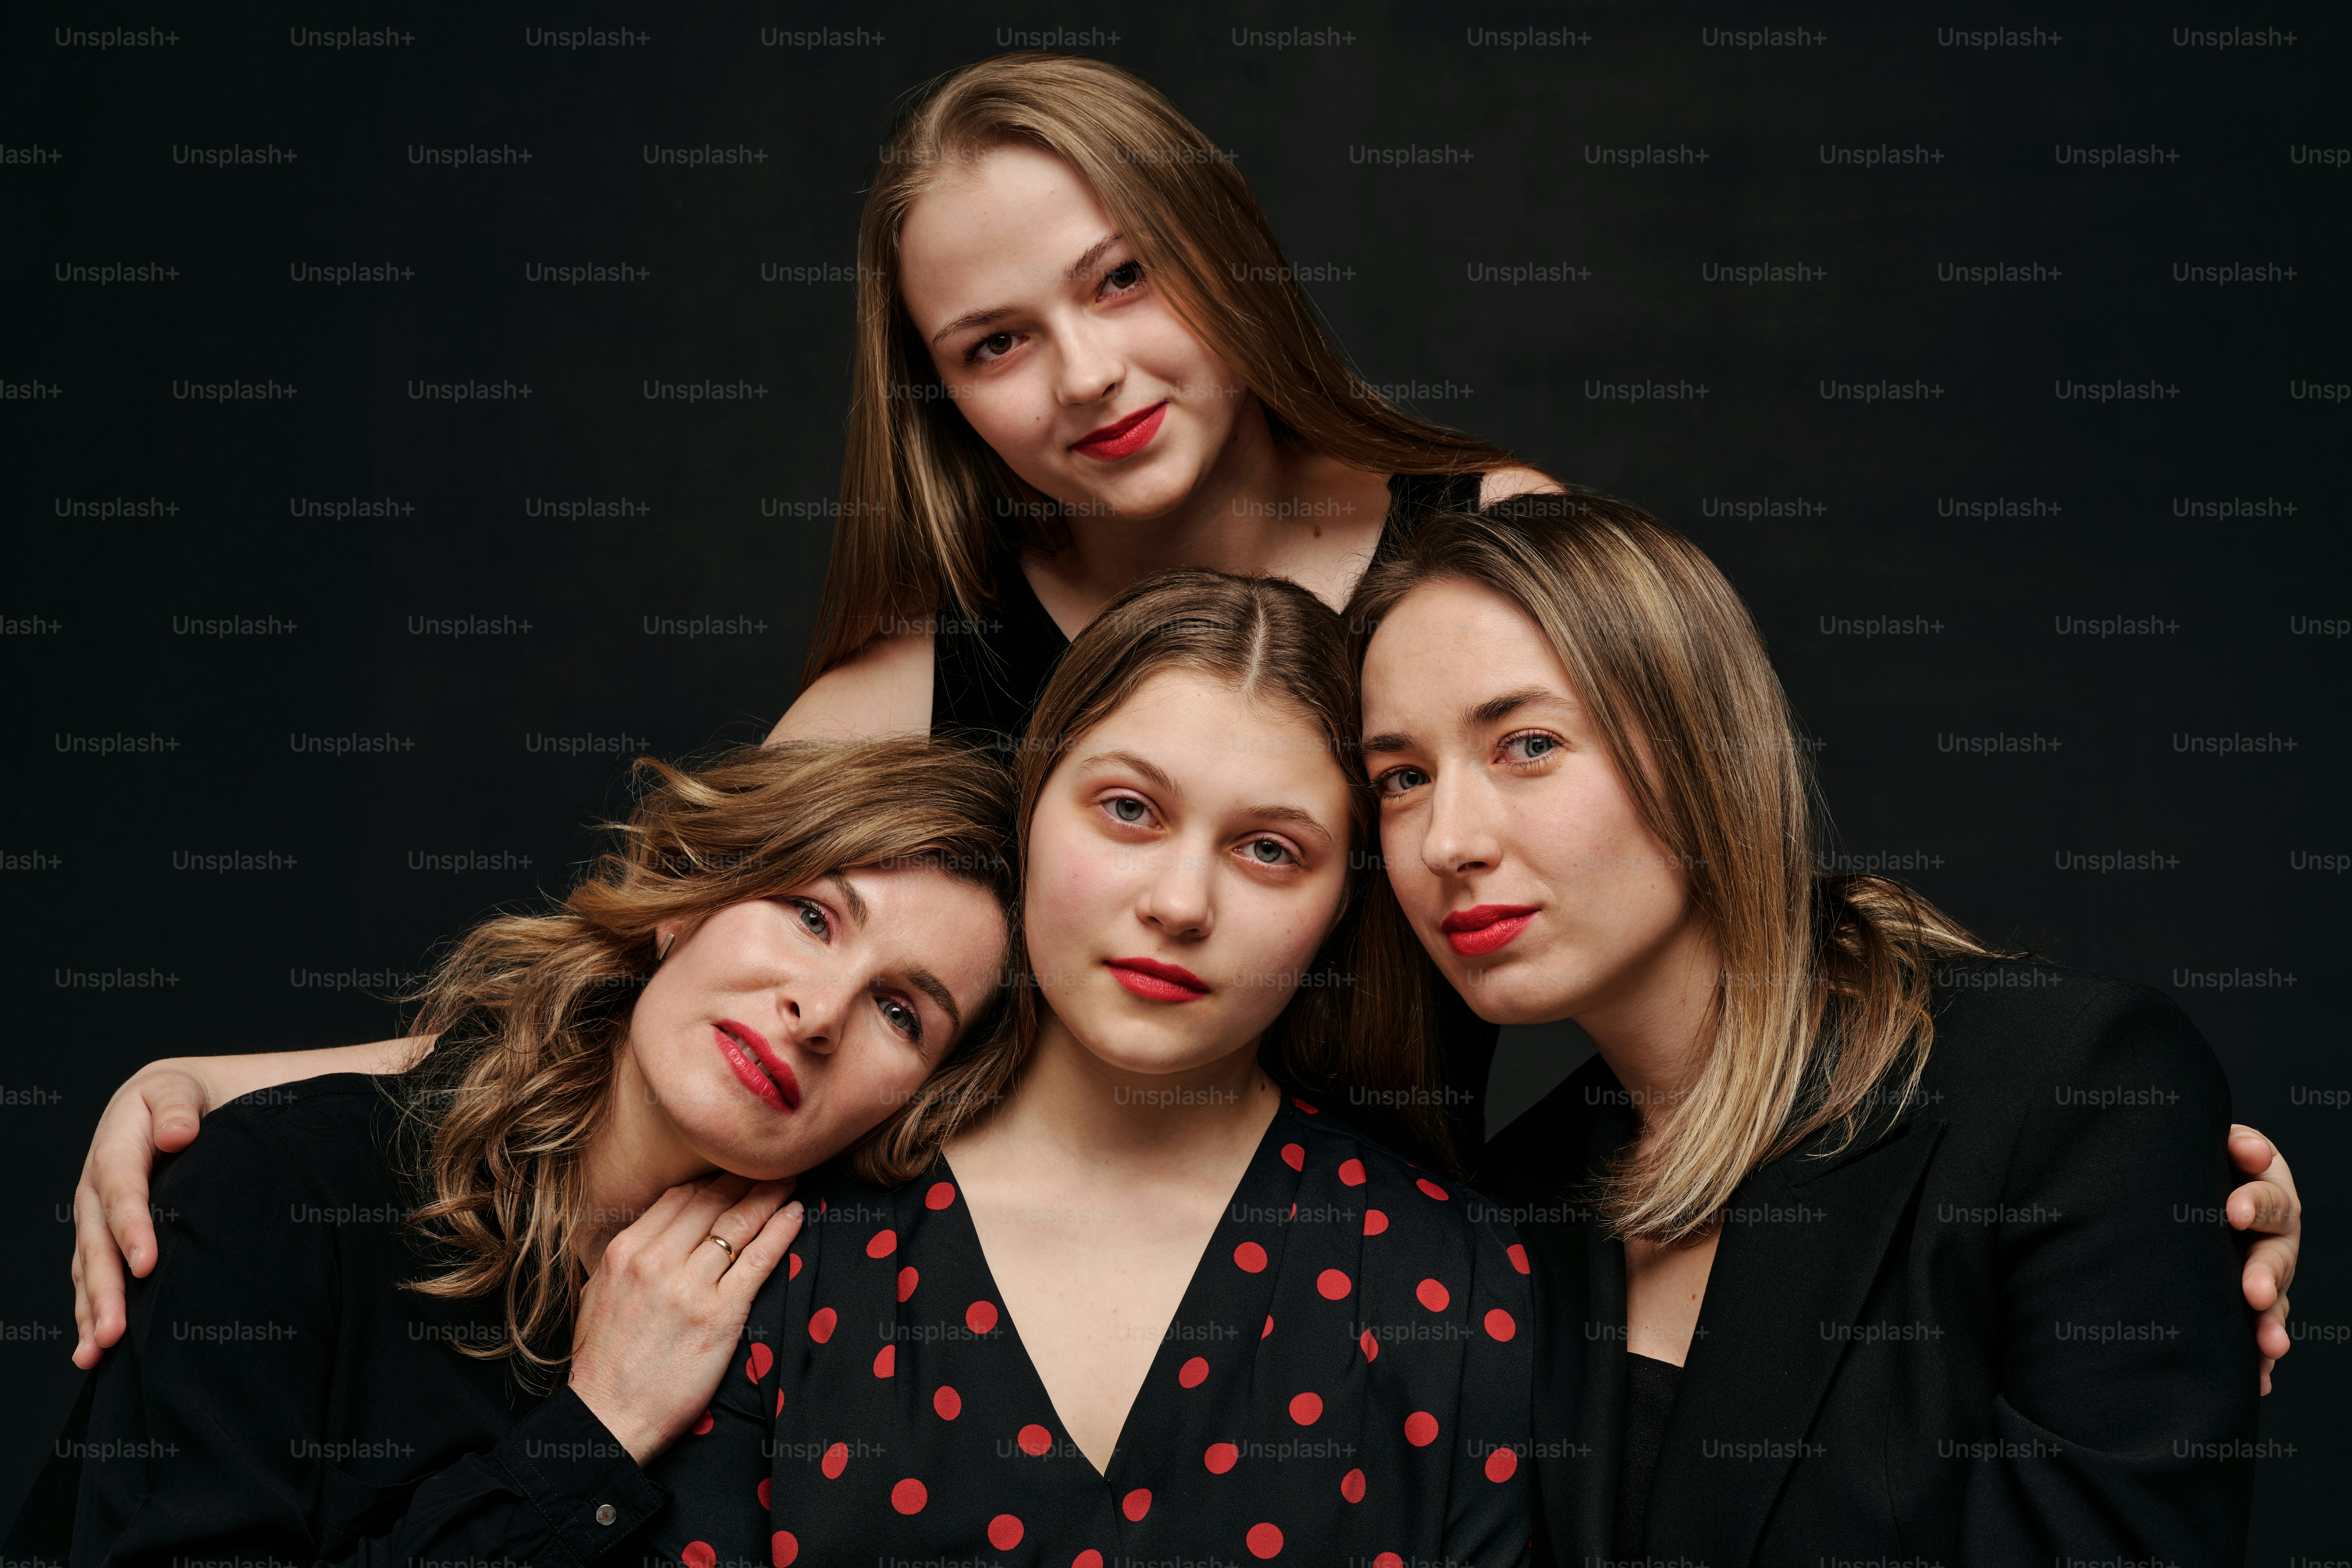 Studio portrait of a group of women of different ages and body types